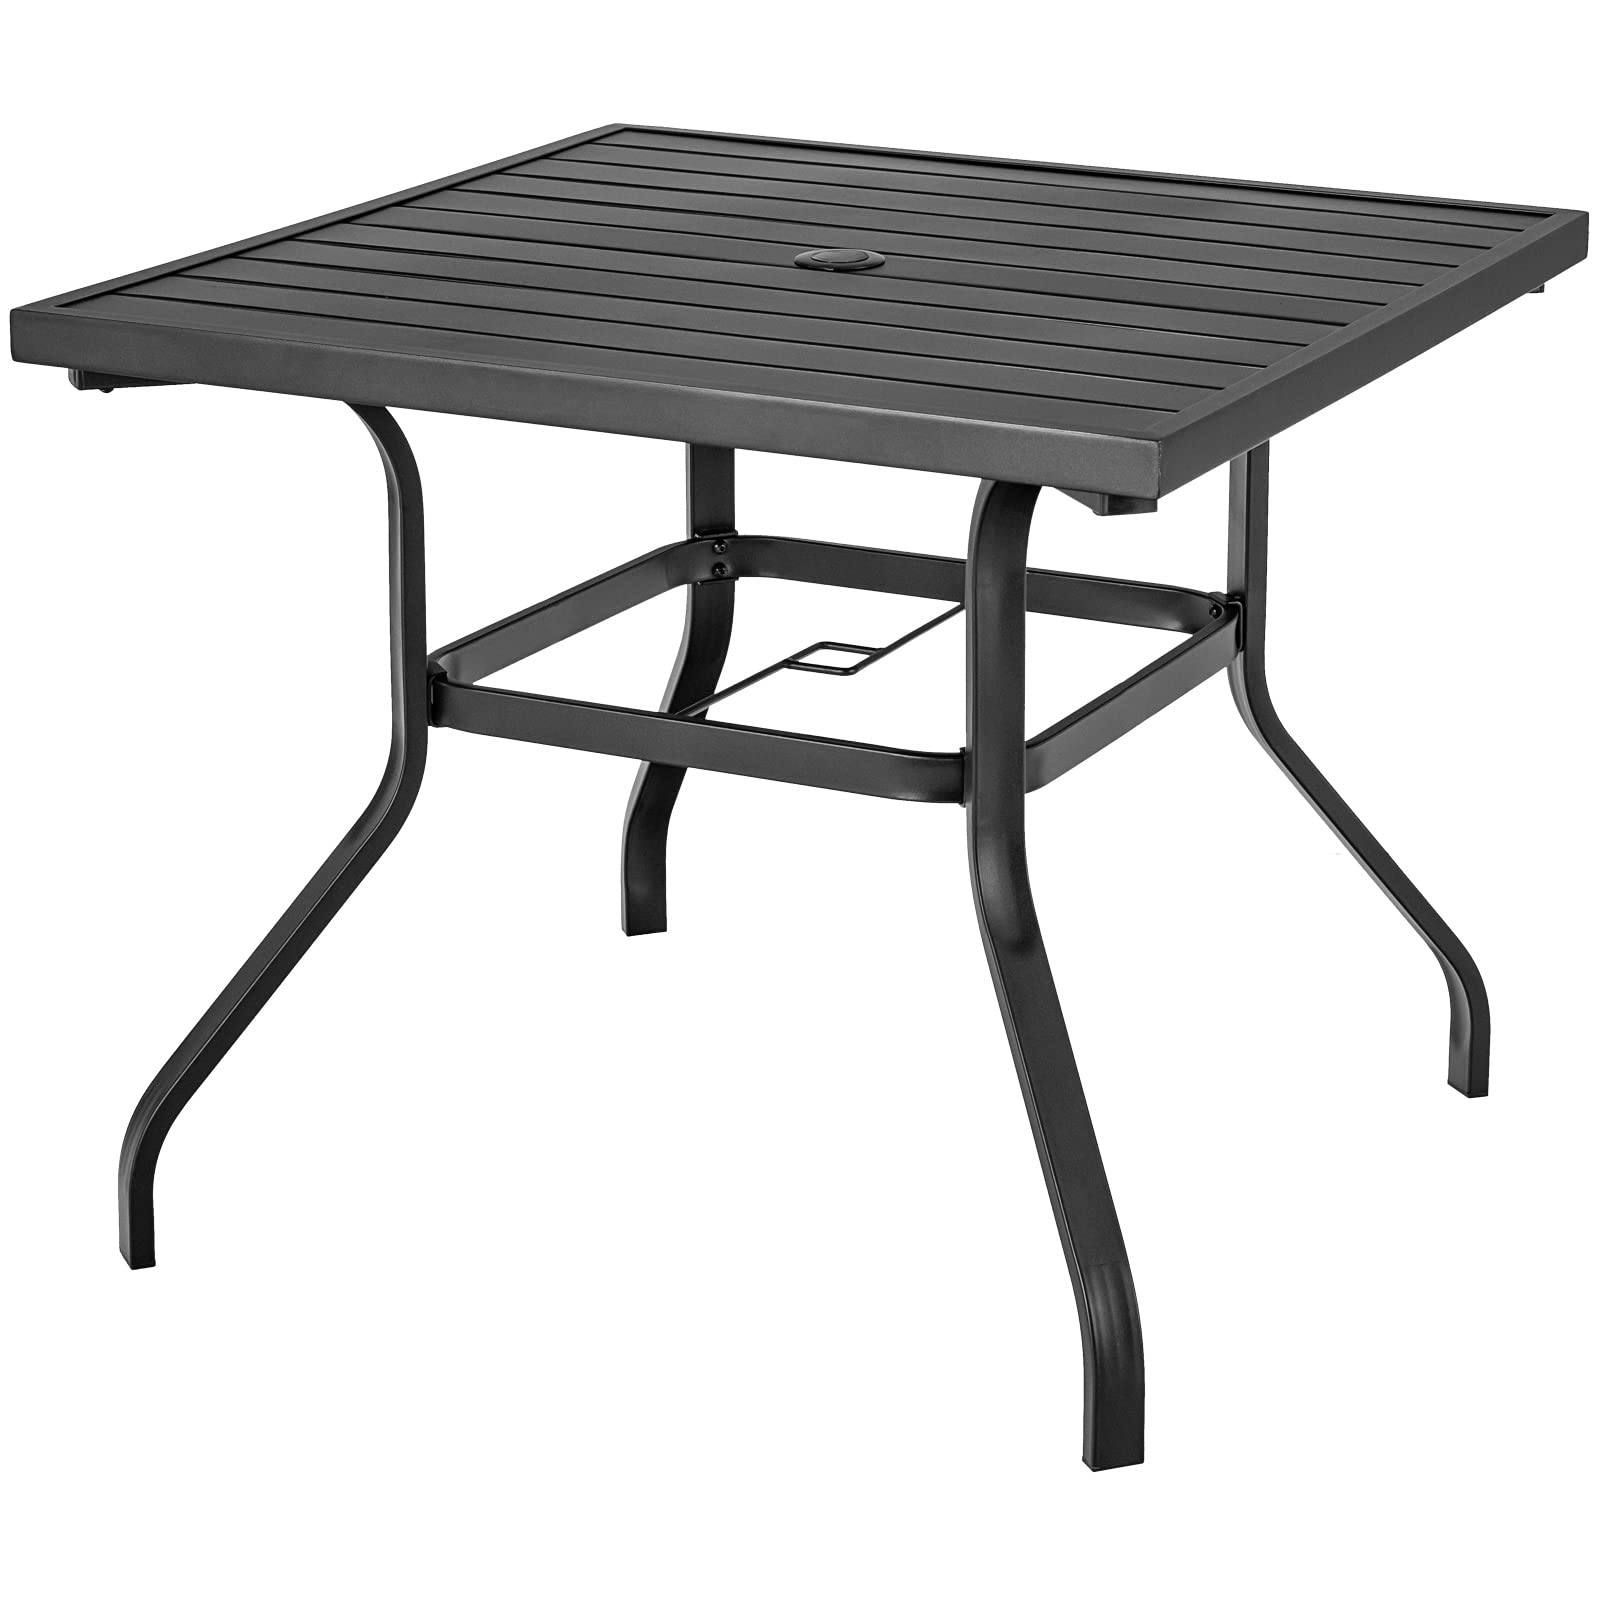 Giantex Patio Dining Table, Outdoor Bistro Table for 4 Person, with Umbrella Pole Hole